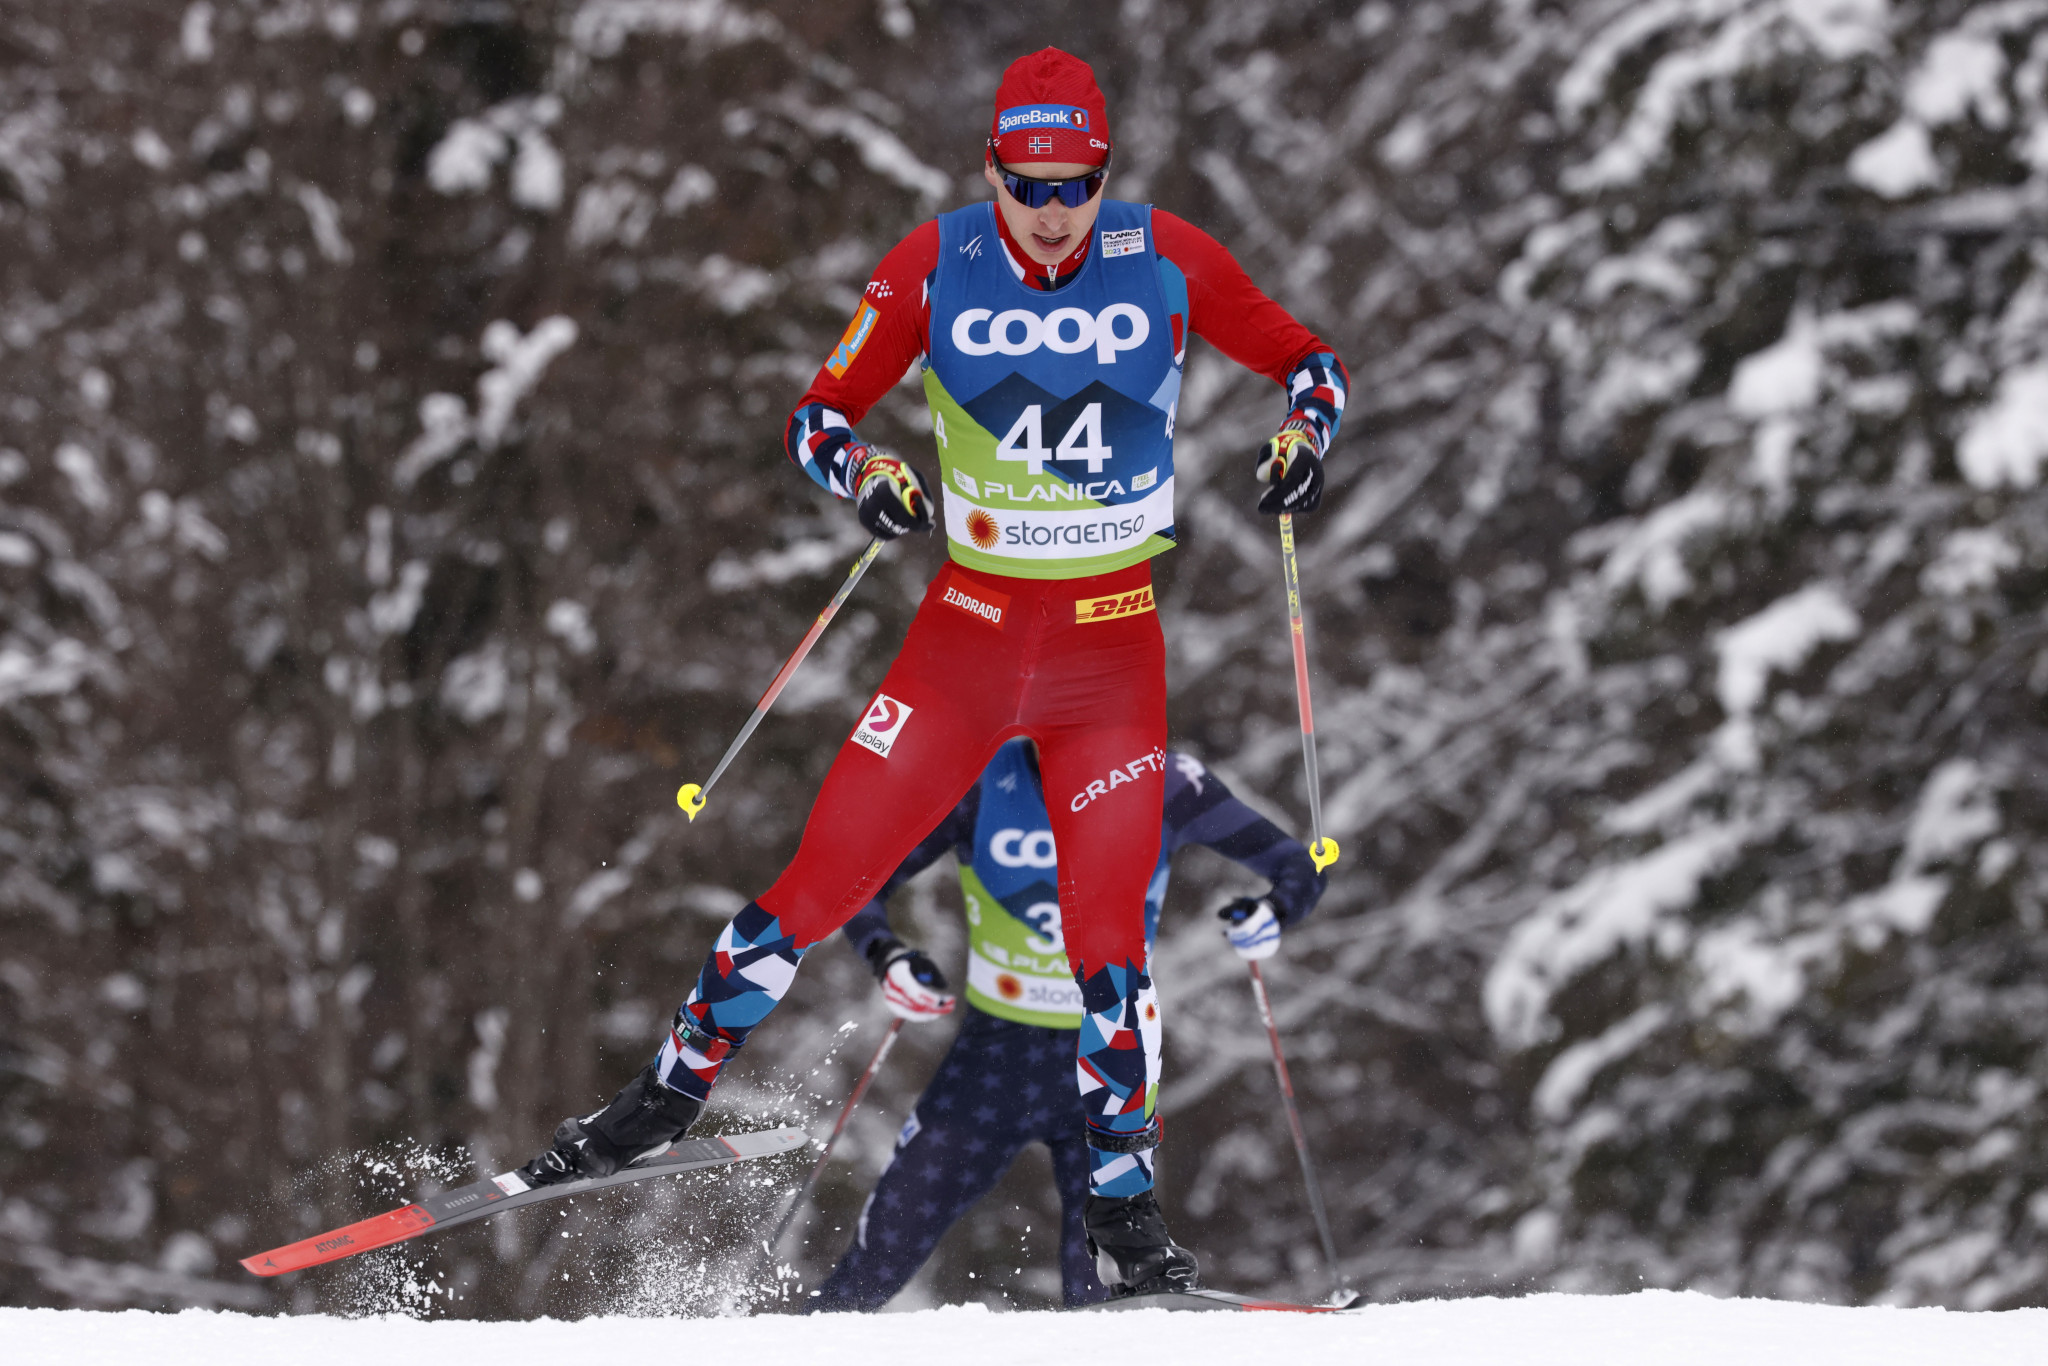 Simen Hegstad Krueger led a Norway clean sweep in the men's 15km individual free cross-country skiing at Planica ©Getty Images 